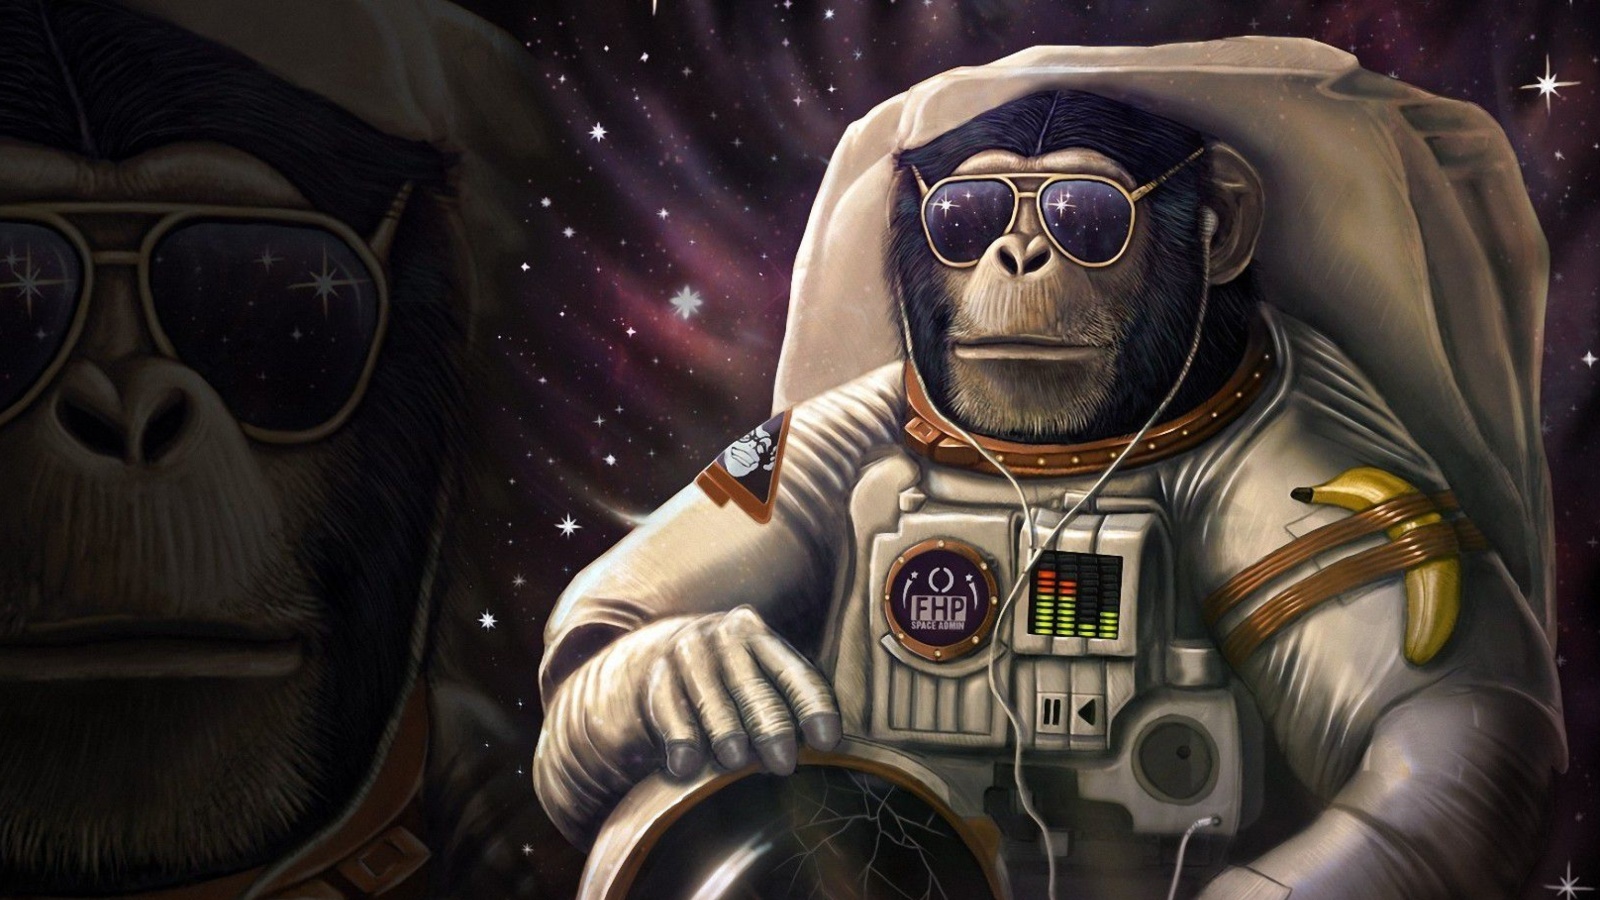 Monkeys and apes in space wallpaper 1600x900